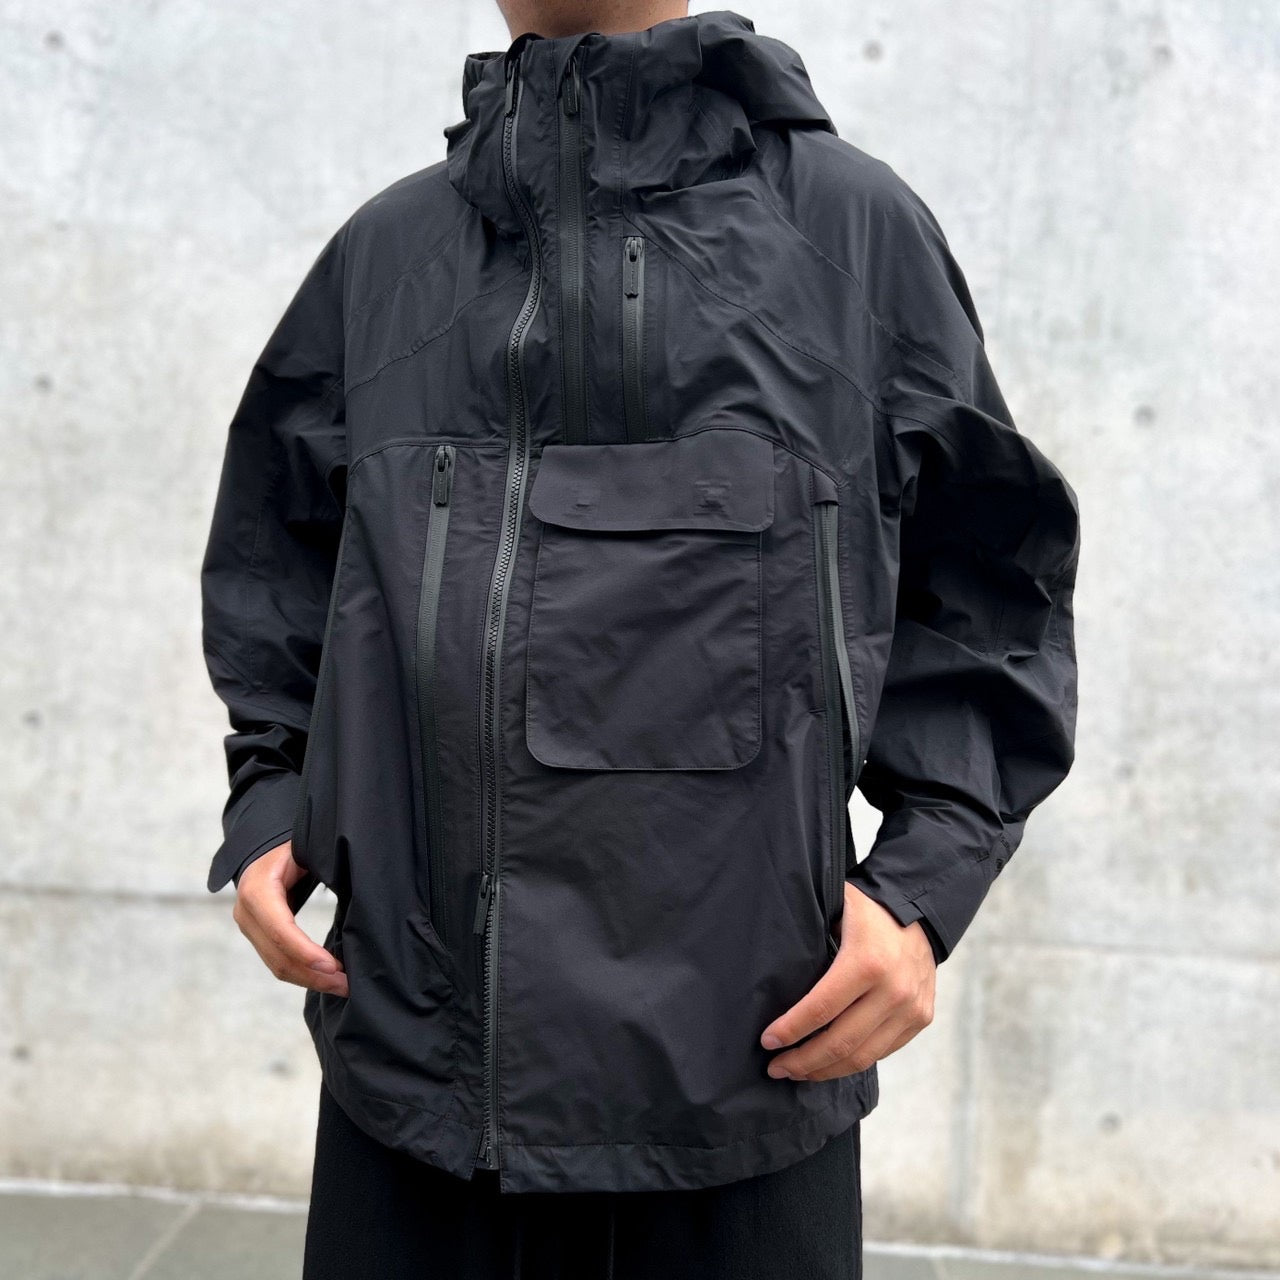 White Mountaineering /GORE-TEX 30D ASYMMETRY JACKET| JACK in the